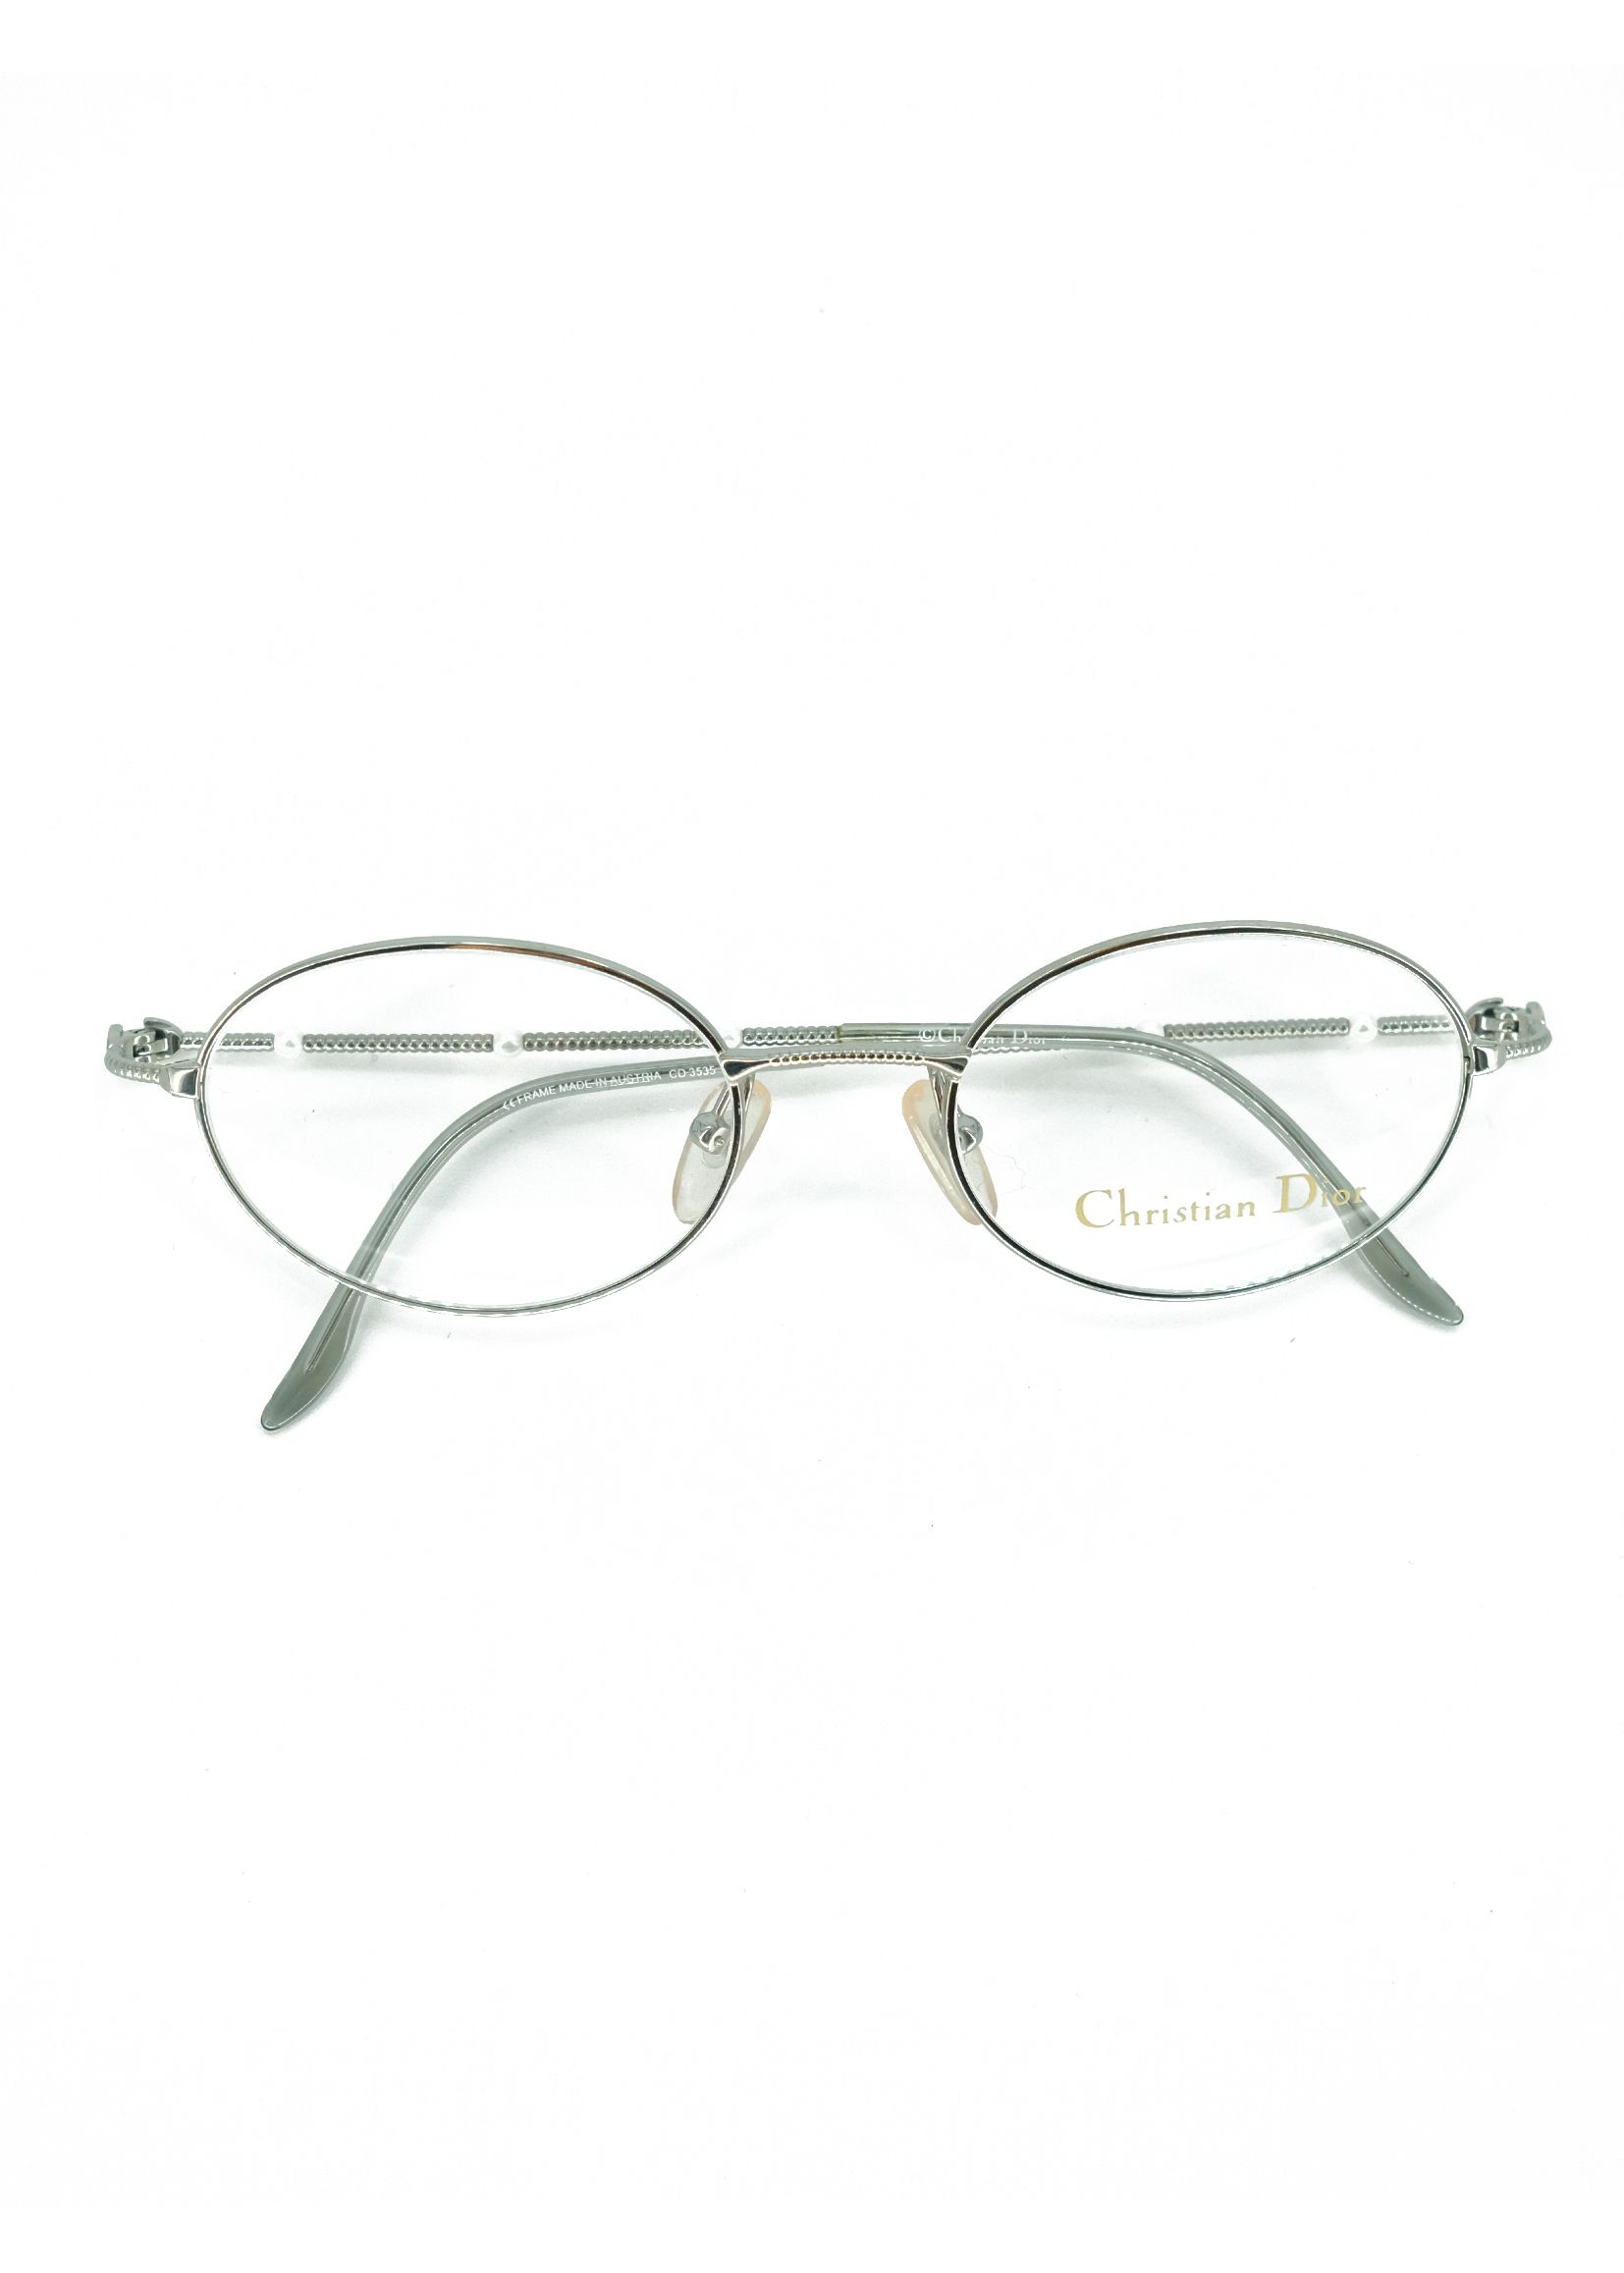 Pre-owned Archival Clothing X Dior 90's New Christian Dior Cd 3527 Pearls Frame Glasses In Silver